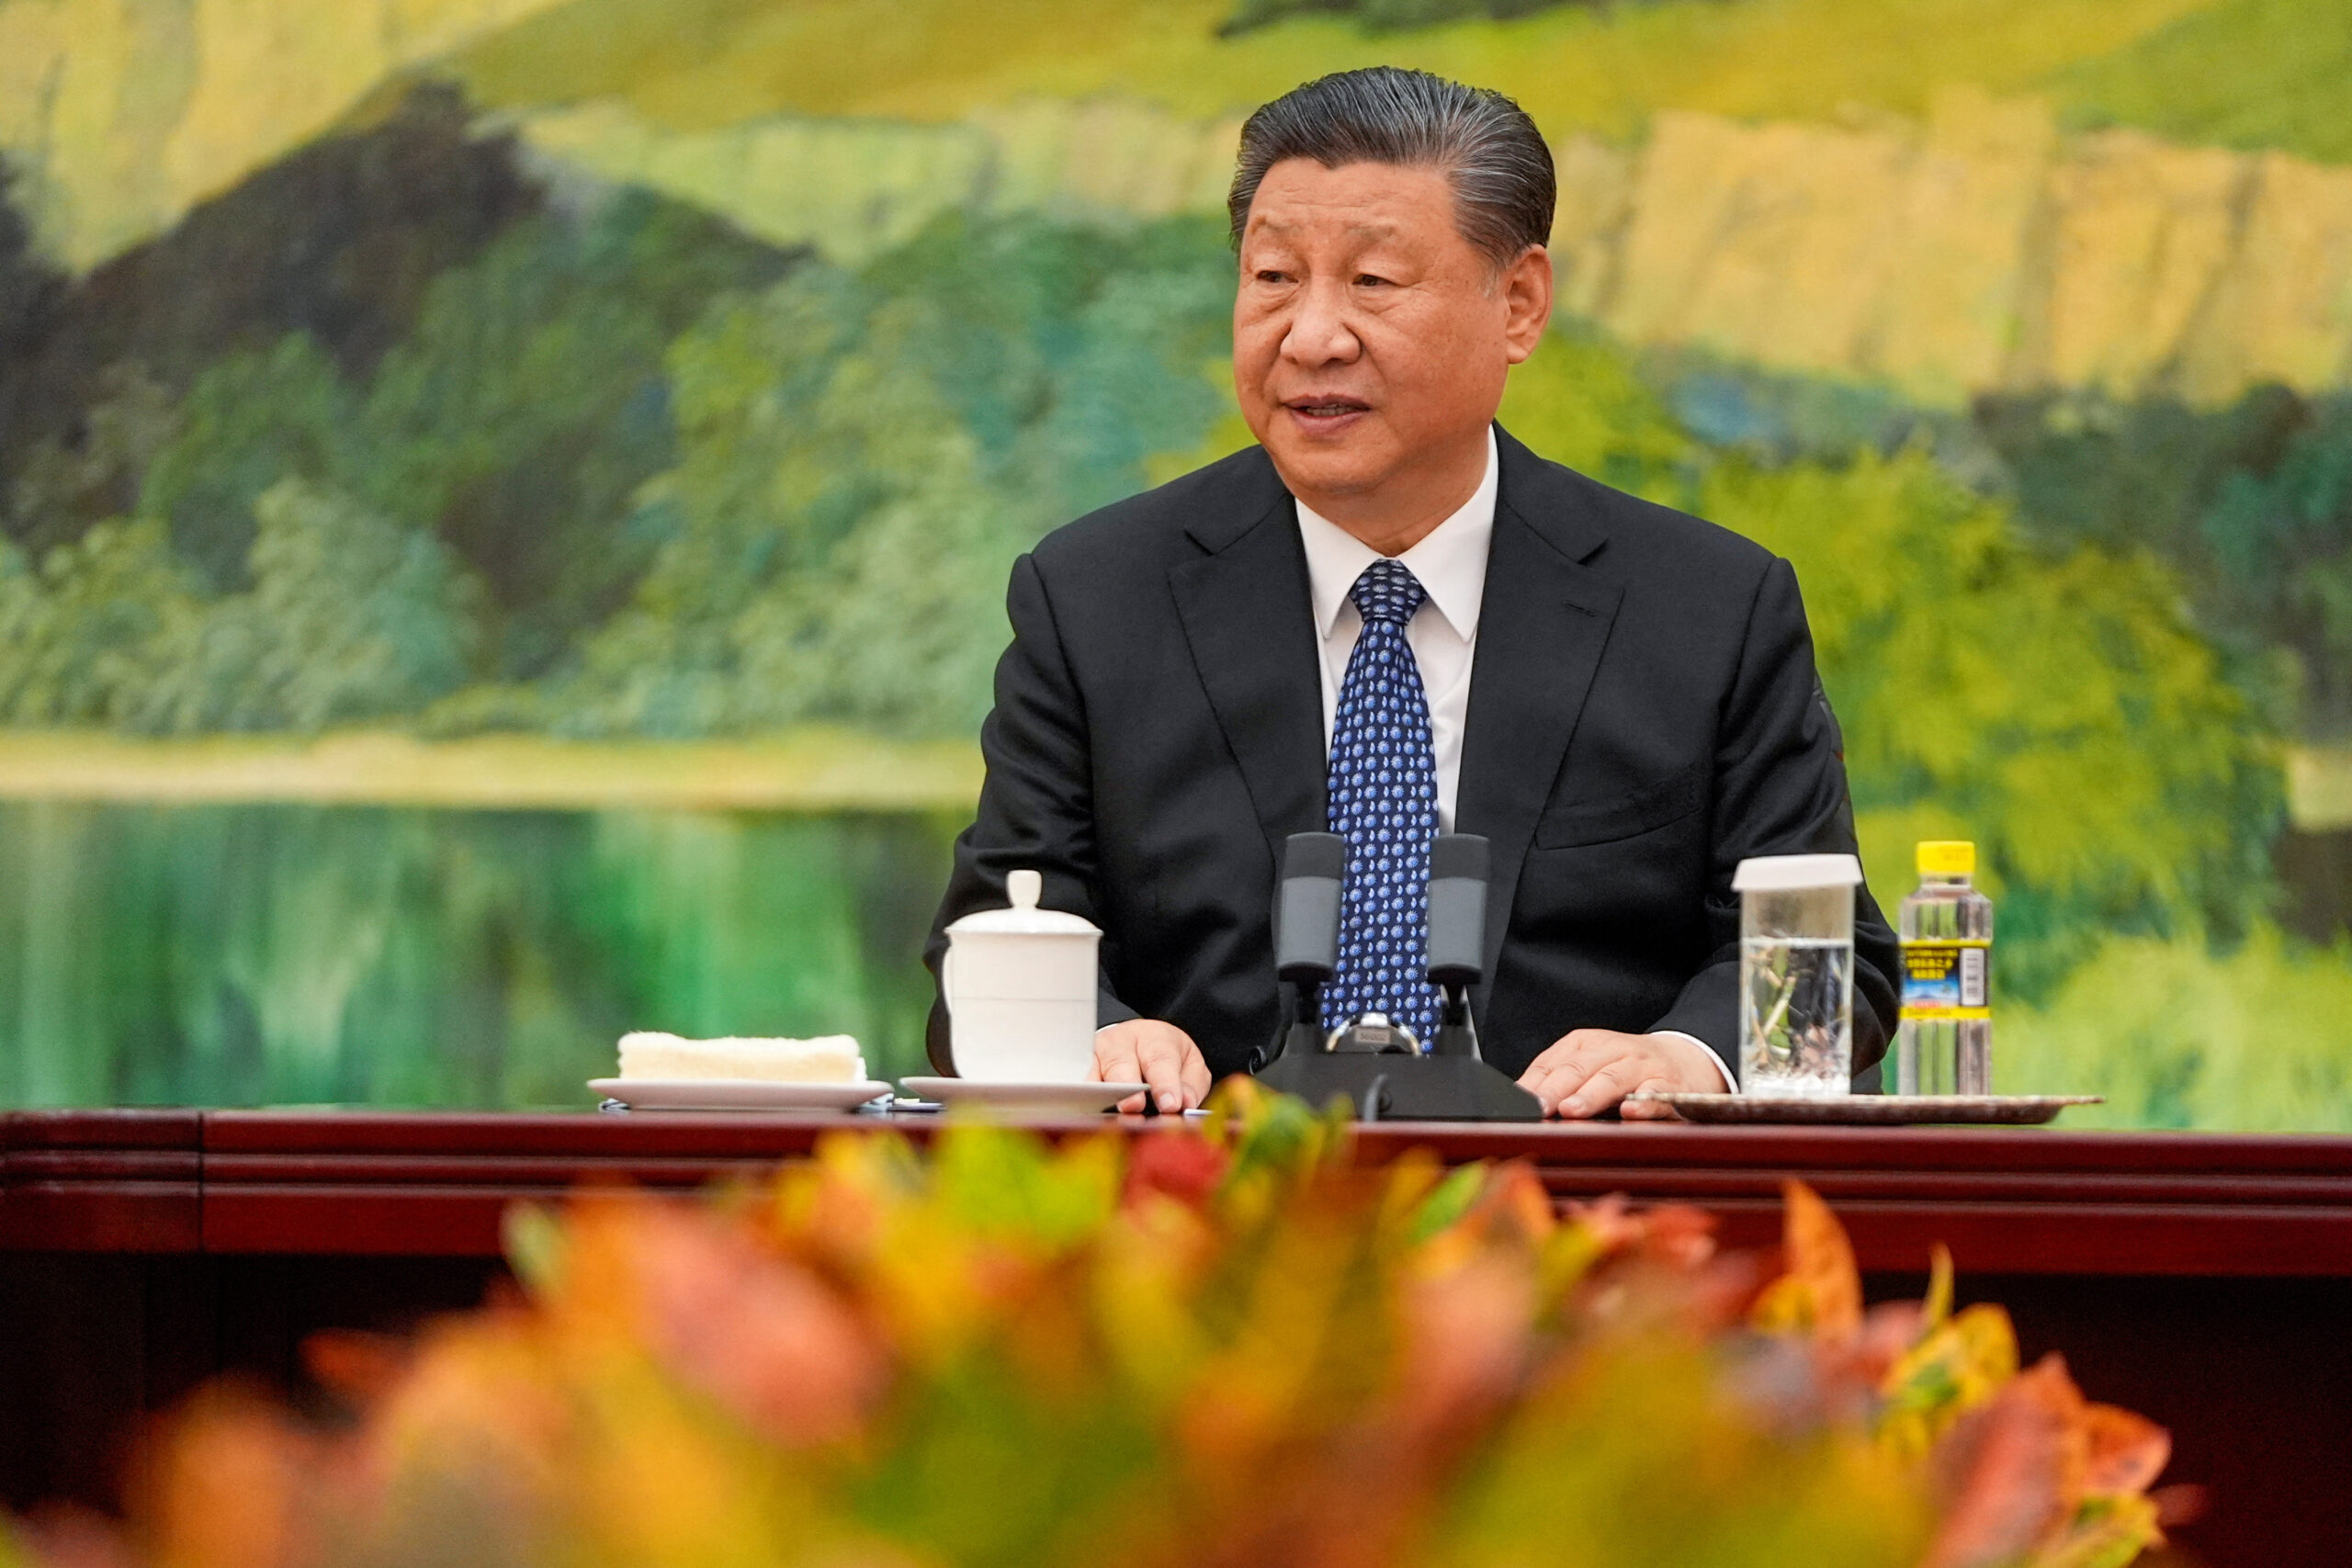 Amid Tensions With Europe, Xi Jinping To Visit France, Serbia And Hungary